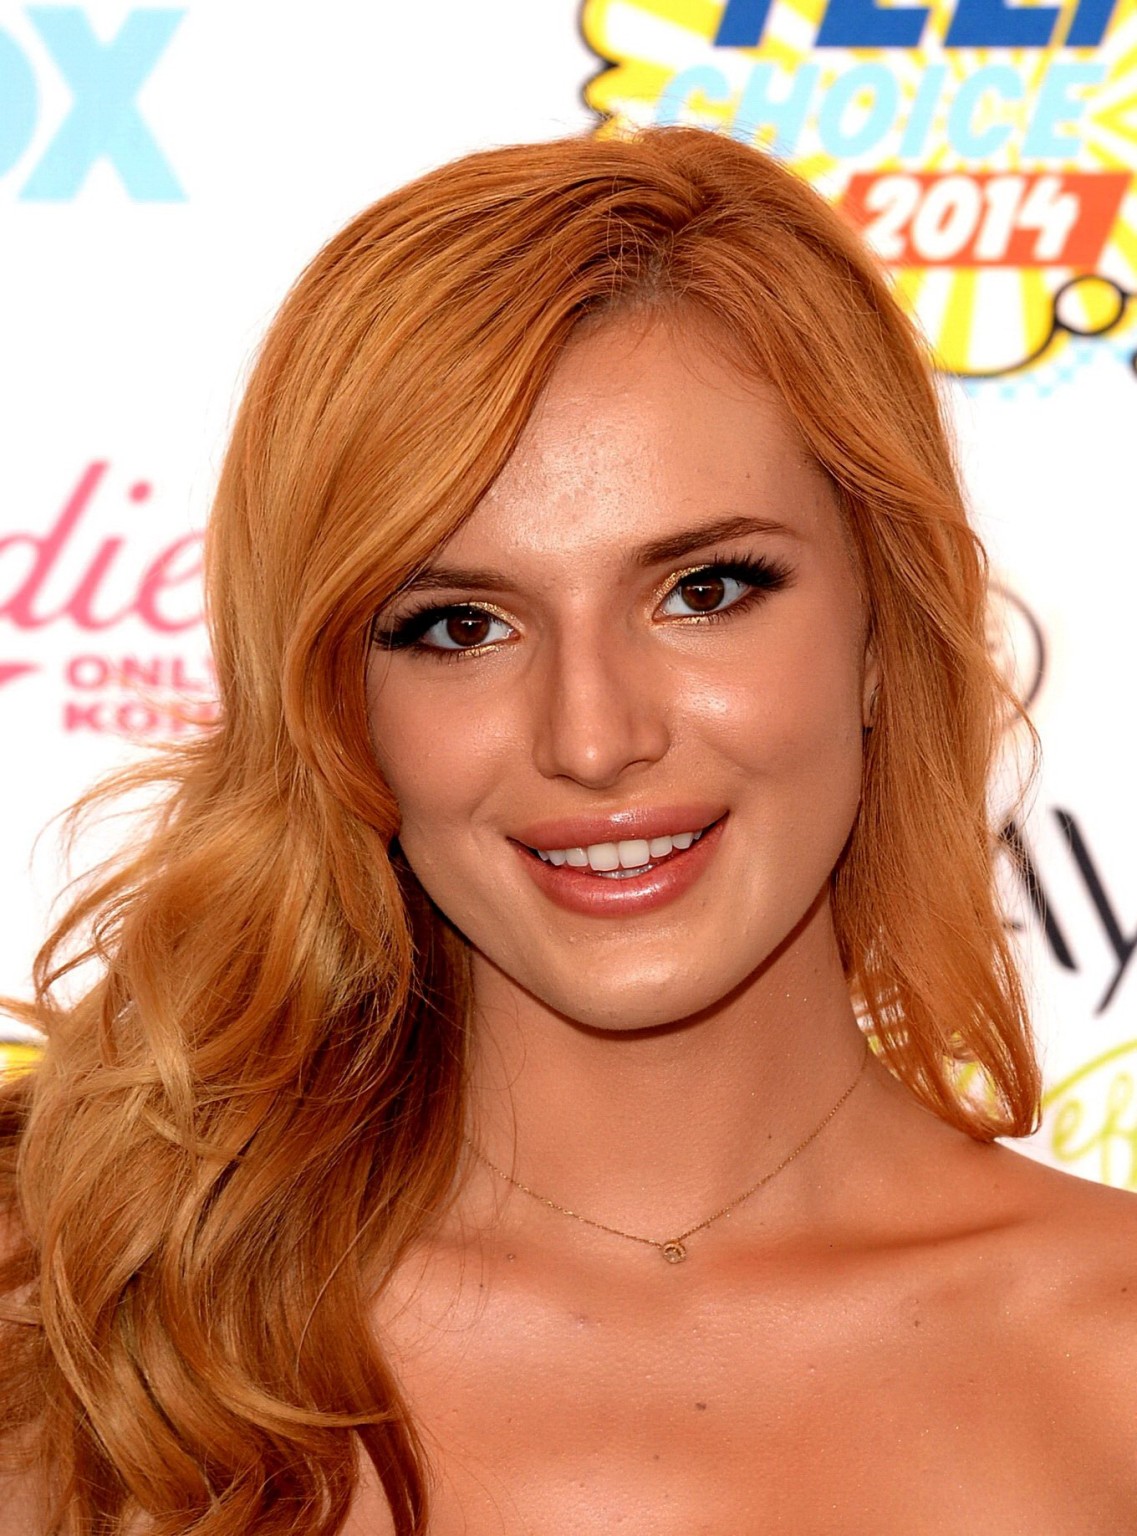 Bella Thorne braless wearing a strapless dress at the 2014 Teen Choice Awards in #75188507